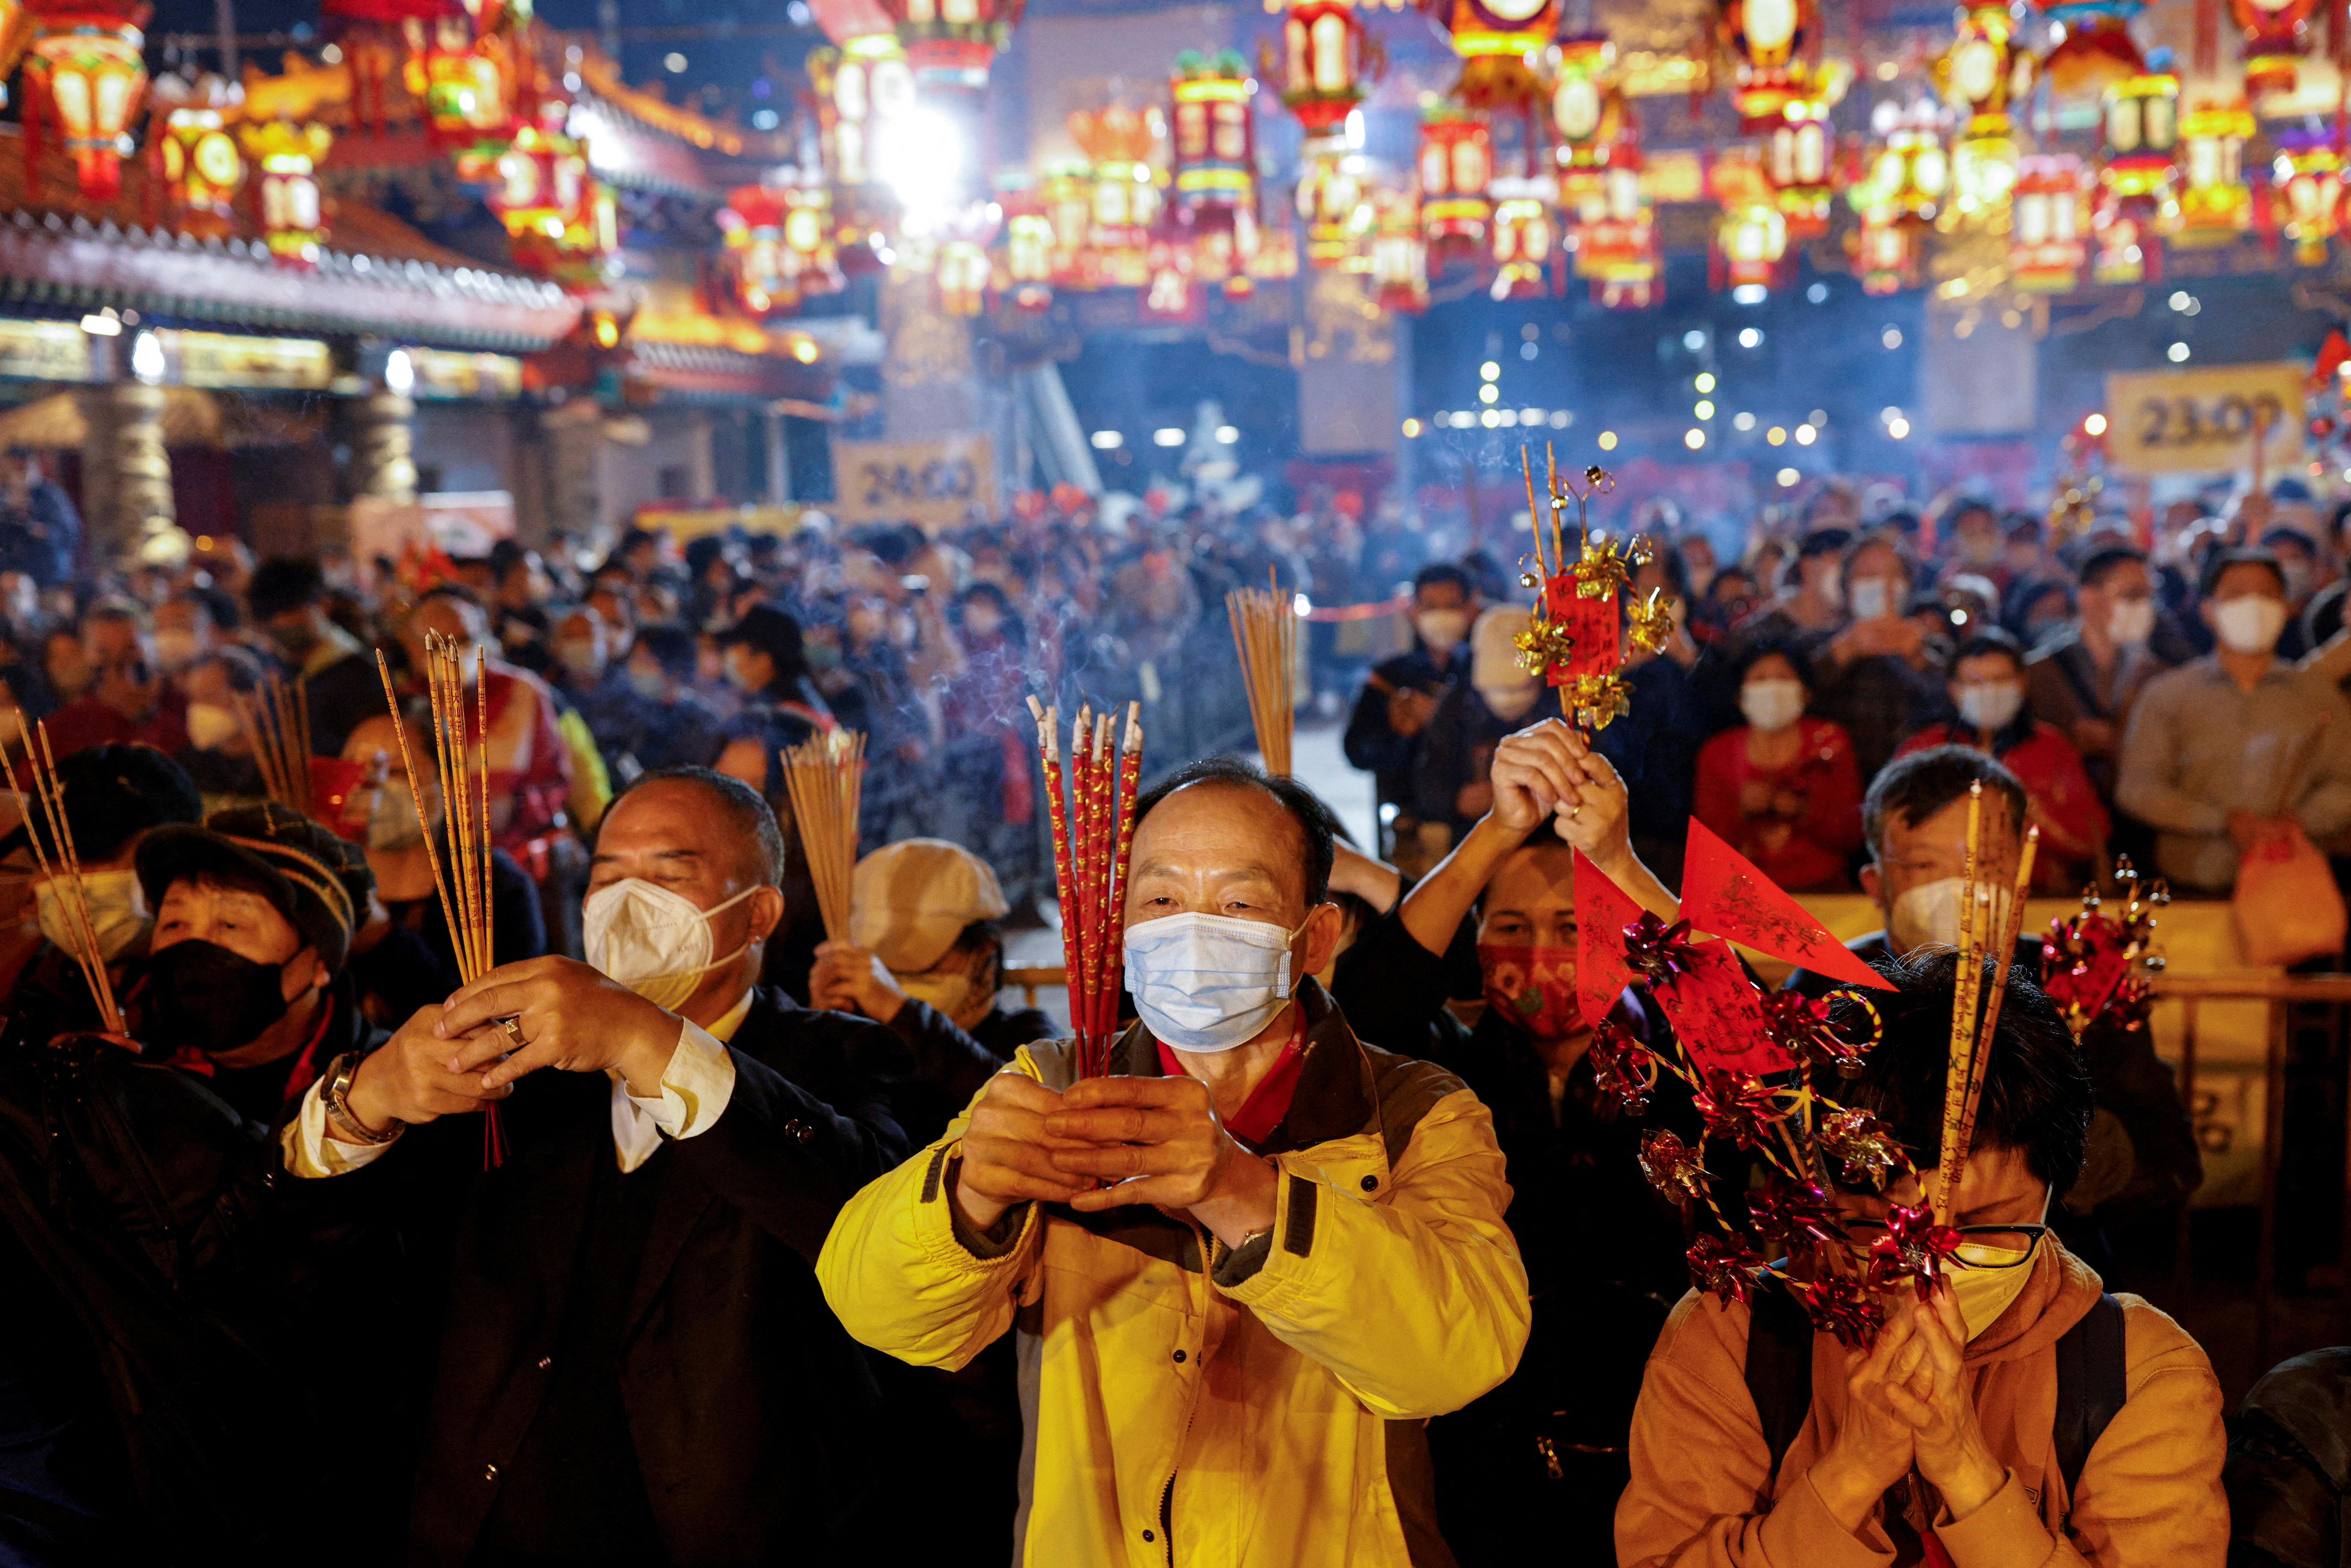 Chinese pray for health in Lunar New Year as COVID death toll rises